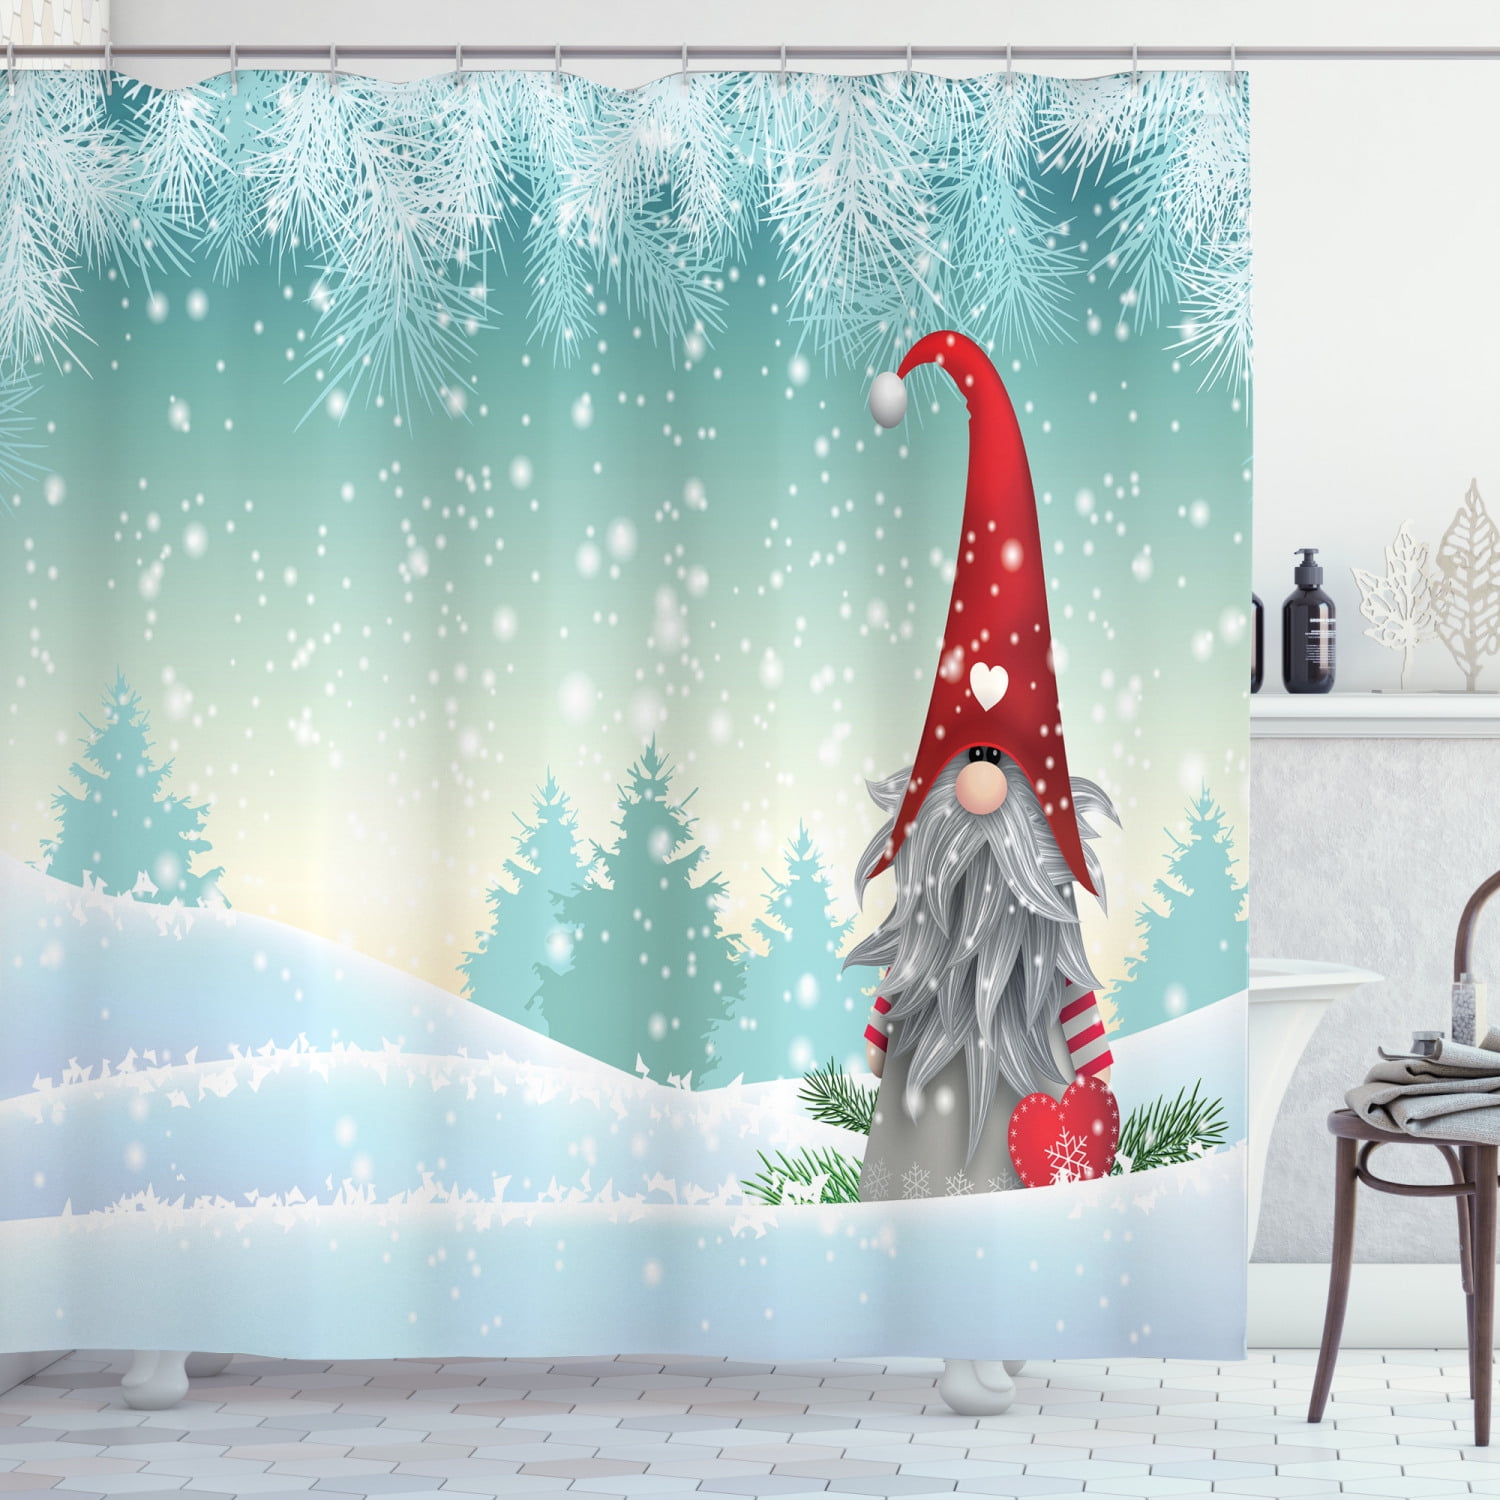 Fireplace and Christmas Tree Shower Curtain Bathroom Decor Fabric & 12hooks 71in 